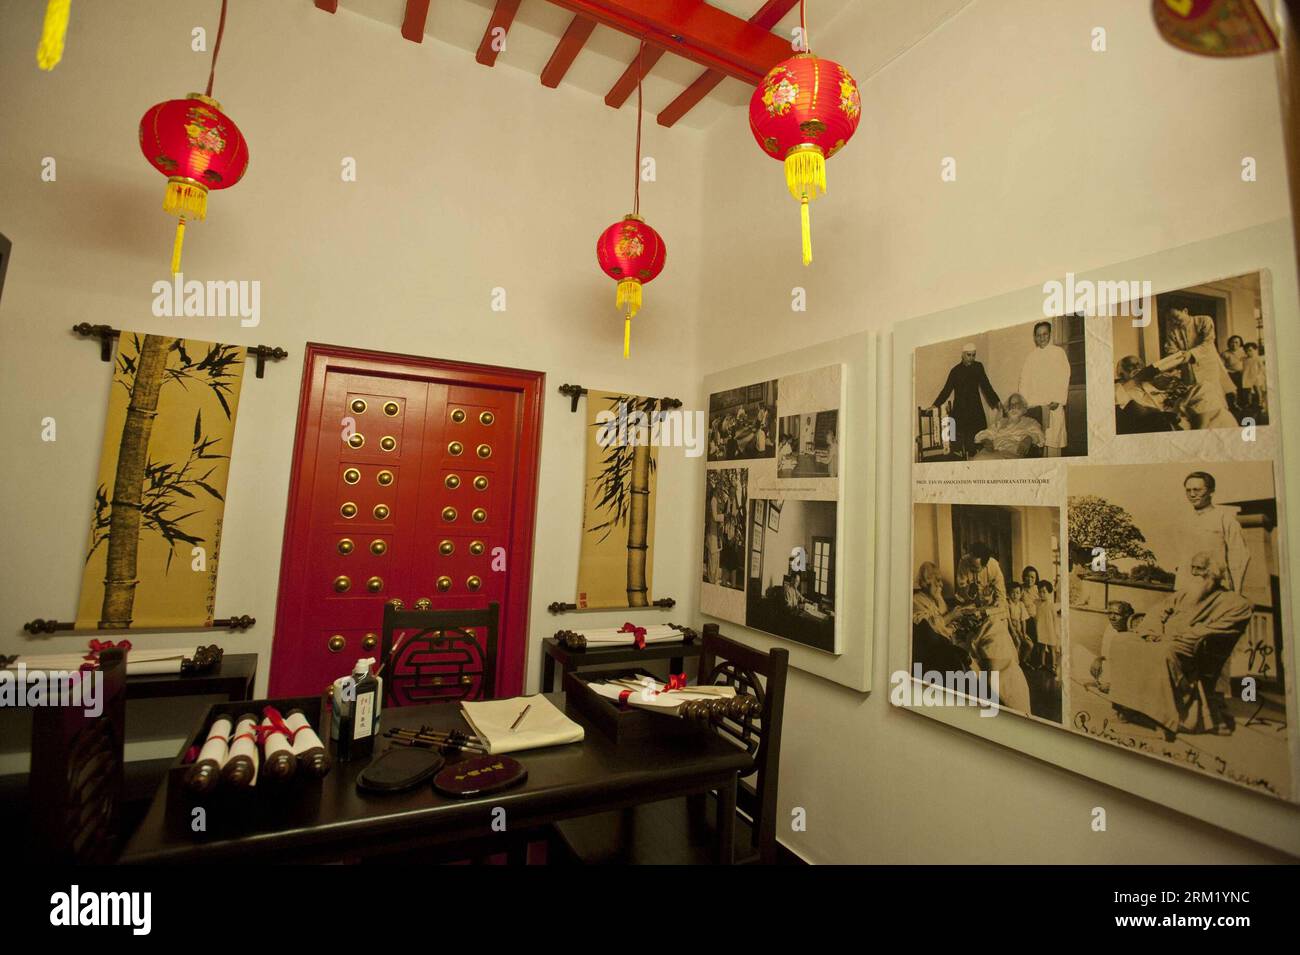 Bildnummer: 59652960  Datum: 15.05.2013  Copyright: imago/Xinhua (130516) -- KOLKATA, May 2013 (Xinhua) -- Picture taken on May 15, 2013 shows a scene of China gallery at the Nobel laureate poet Rabindranath Tagore s house in Kolkata, capital of eastern Indian state West Bengal. A prestigious Indian university here on Wednesday opened a gallery about the friendship between legendary Indian poet and philosopher Rabindranath Tagore and China. (Xinhua/Tumpa Mondal) INDIA-KOLKATA-GALLERY INAUGURATION PUBLICATIONxNOTxINxCHN Kultur Ausstellung xbs x0x 2013 quer     59652960 Date 15 05 2013 Copyright Stock Photo